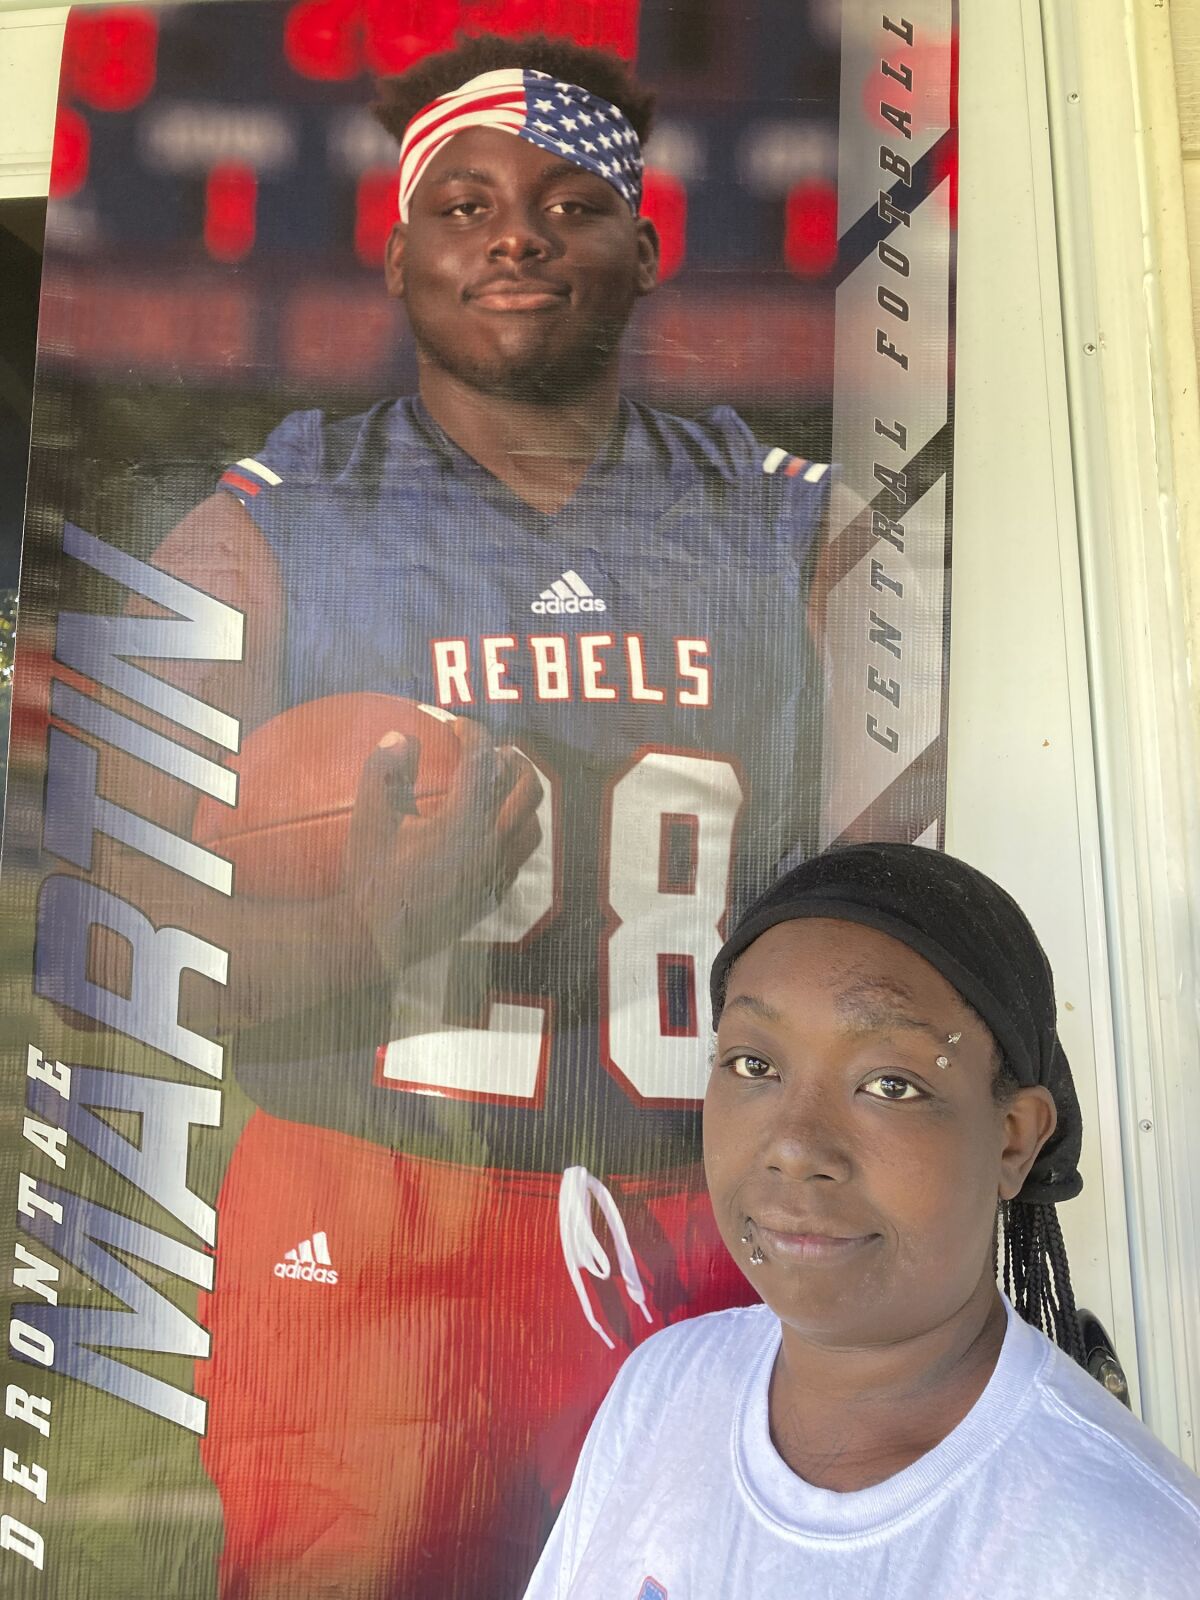 Ericka Lotts stands next to a poster of her son, Derontae Martin, from his high school football playing days, on Friday, Sept. 17, 2021, at her home in Ferguson, Mo. Lotts is frustrated by the pace of the investigation into Martin's death. The 19-year-old died in April at a home in rural Missouri. (AP Photo by Jim Salter)